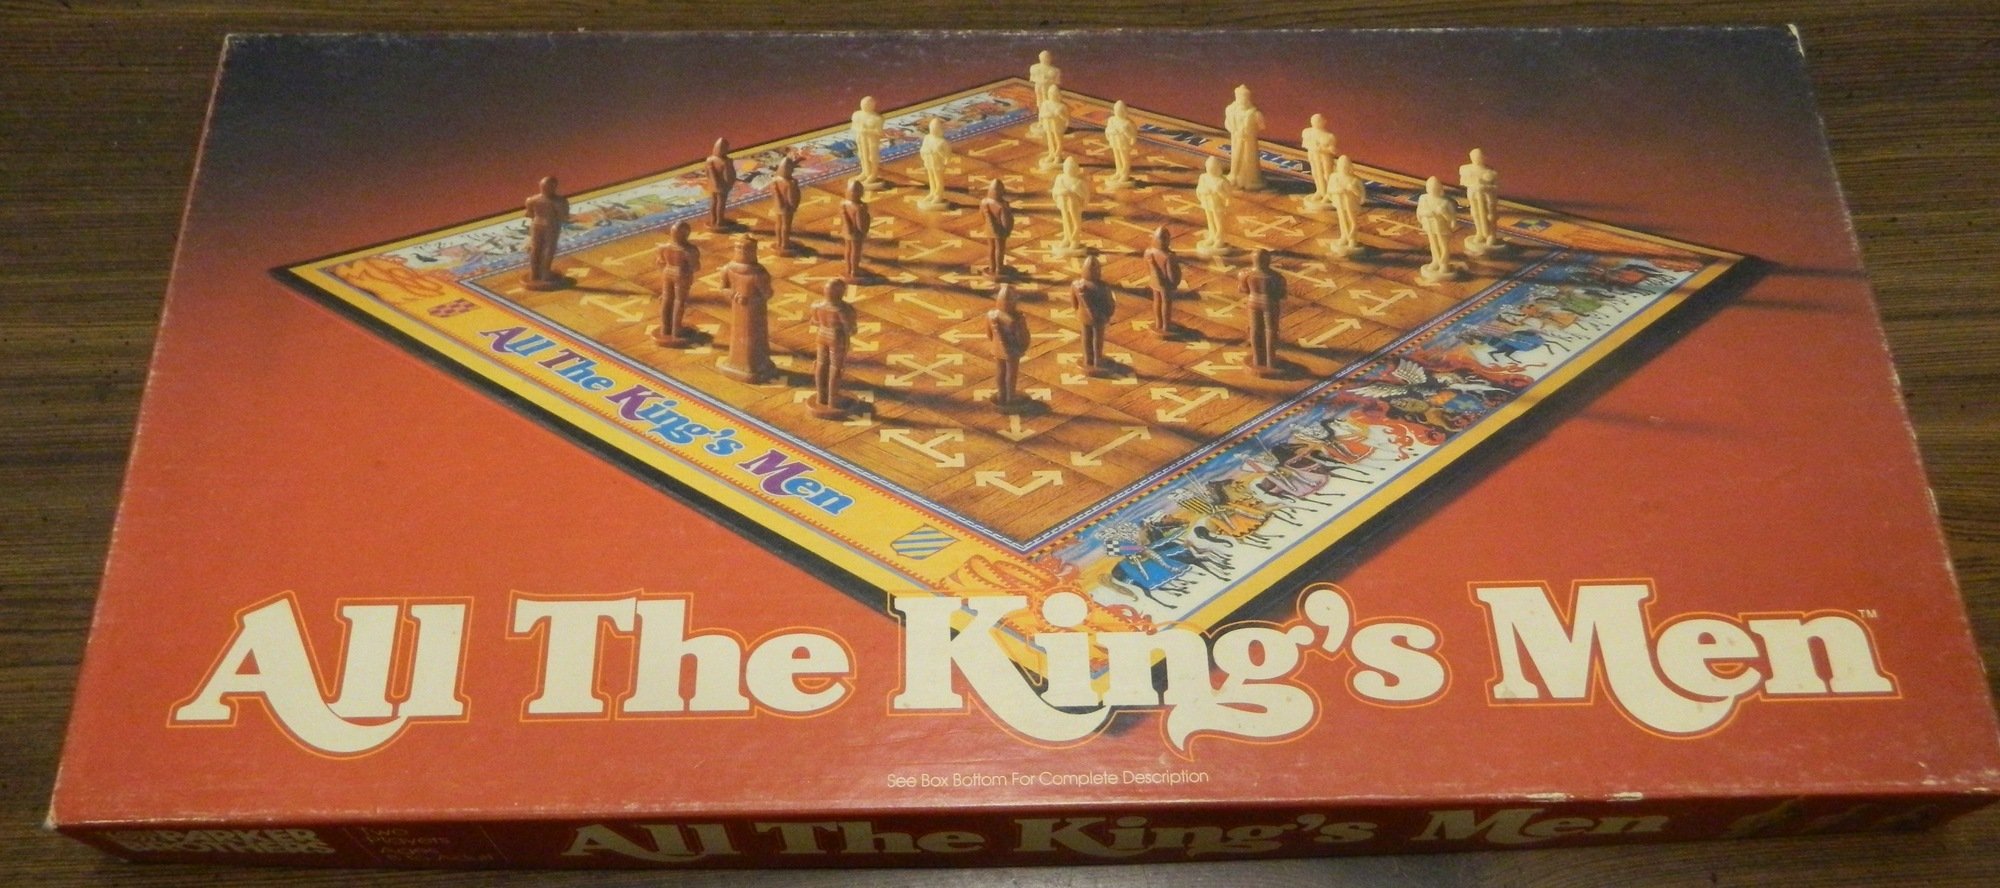 All The King’s Men (AKA Smess: The Ninny’s Chess) Board Game Review and Rules